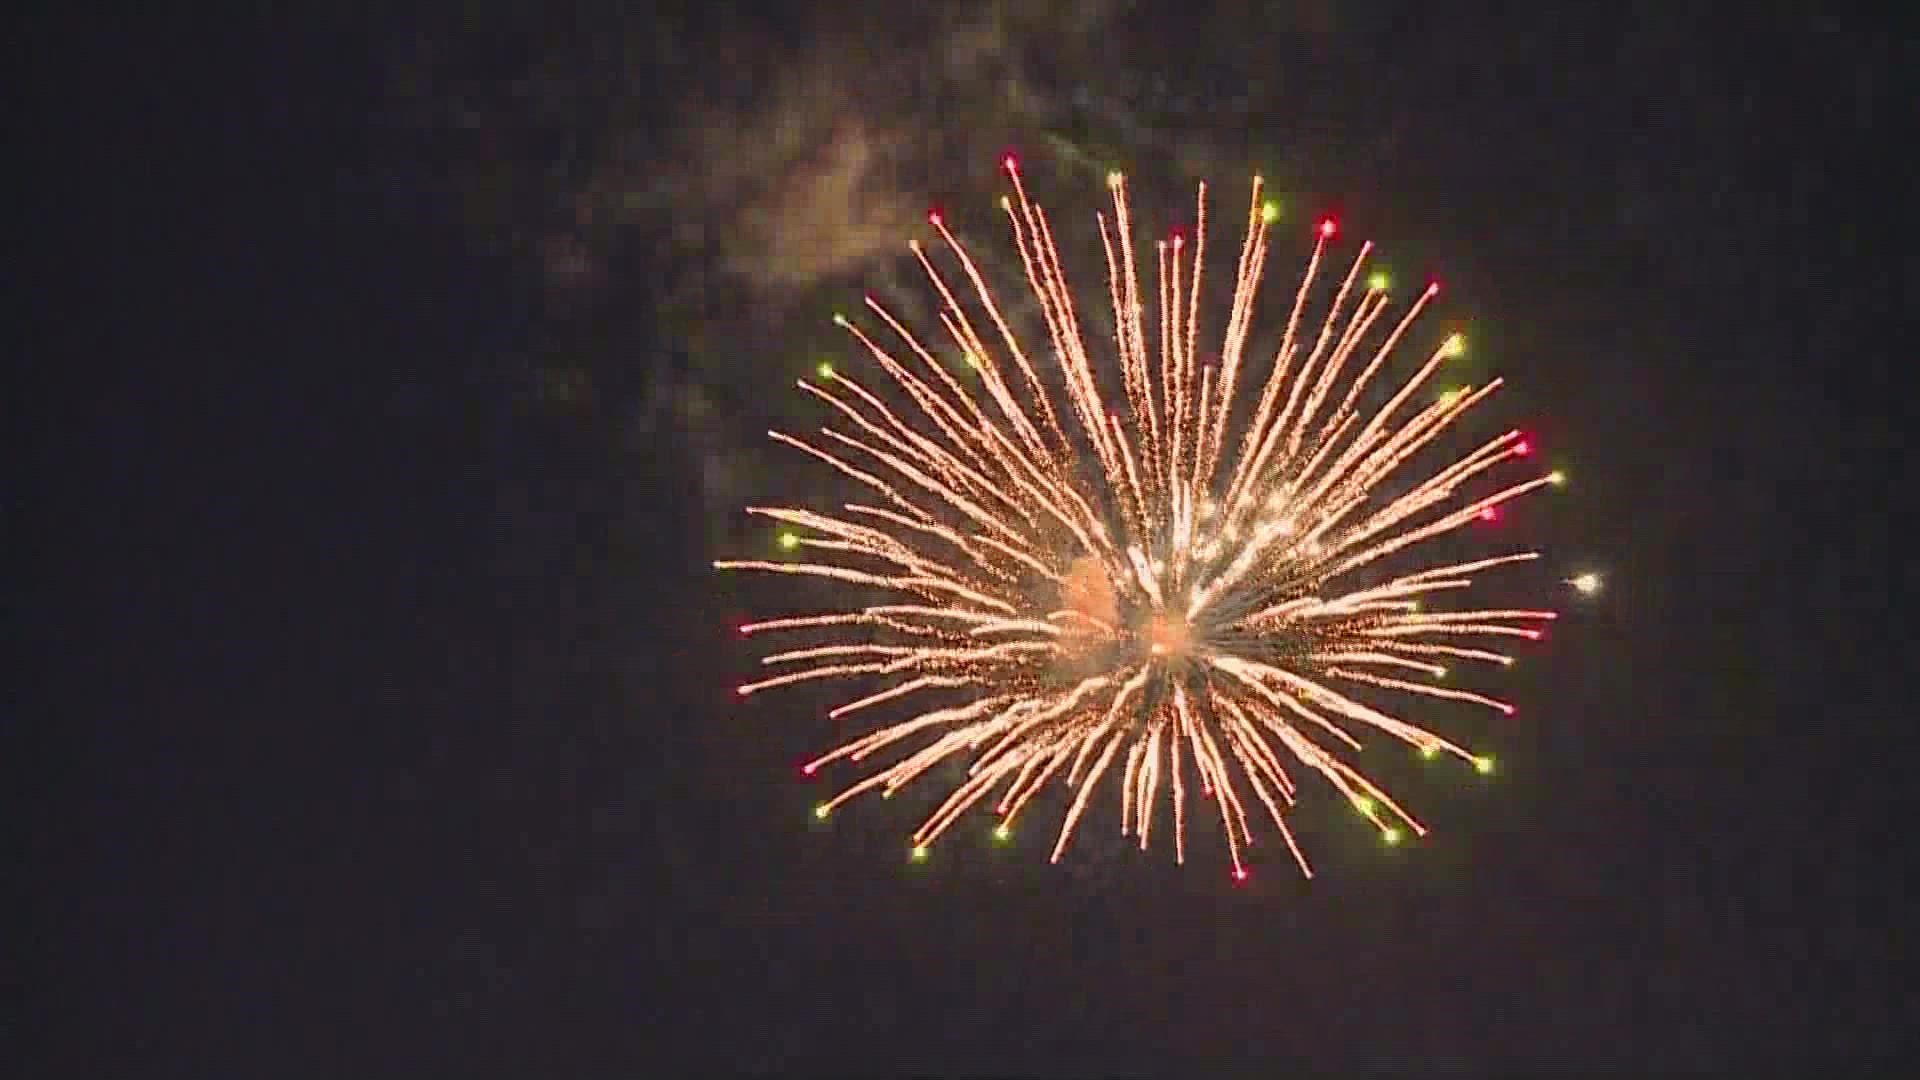 The City of Boerne canceled its Fourth of July fireworks due to safety concerns related to dry weather conditions.